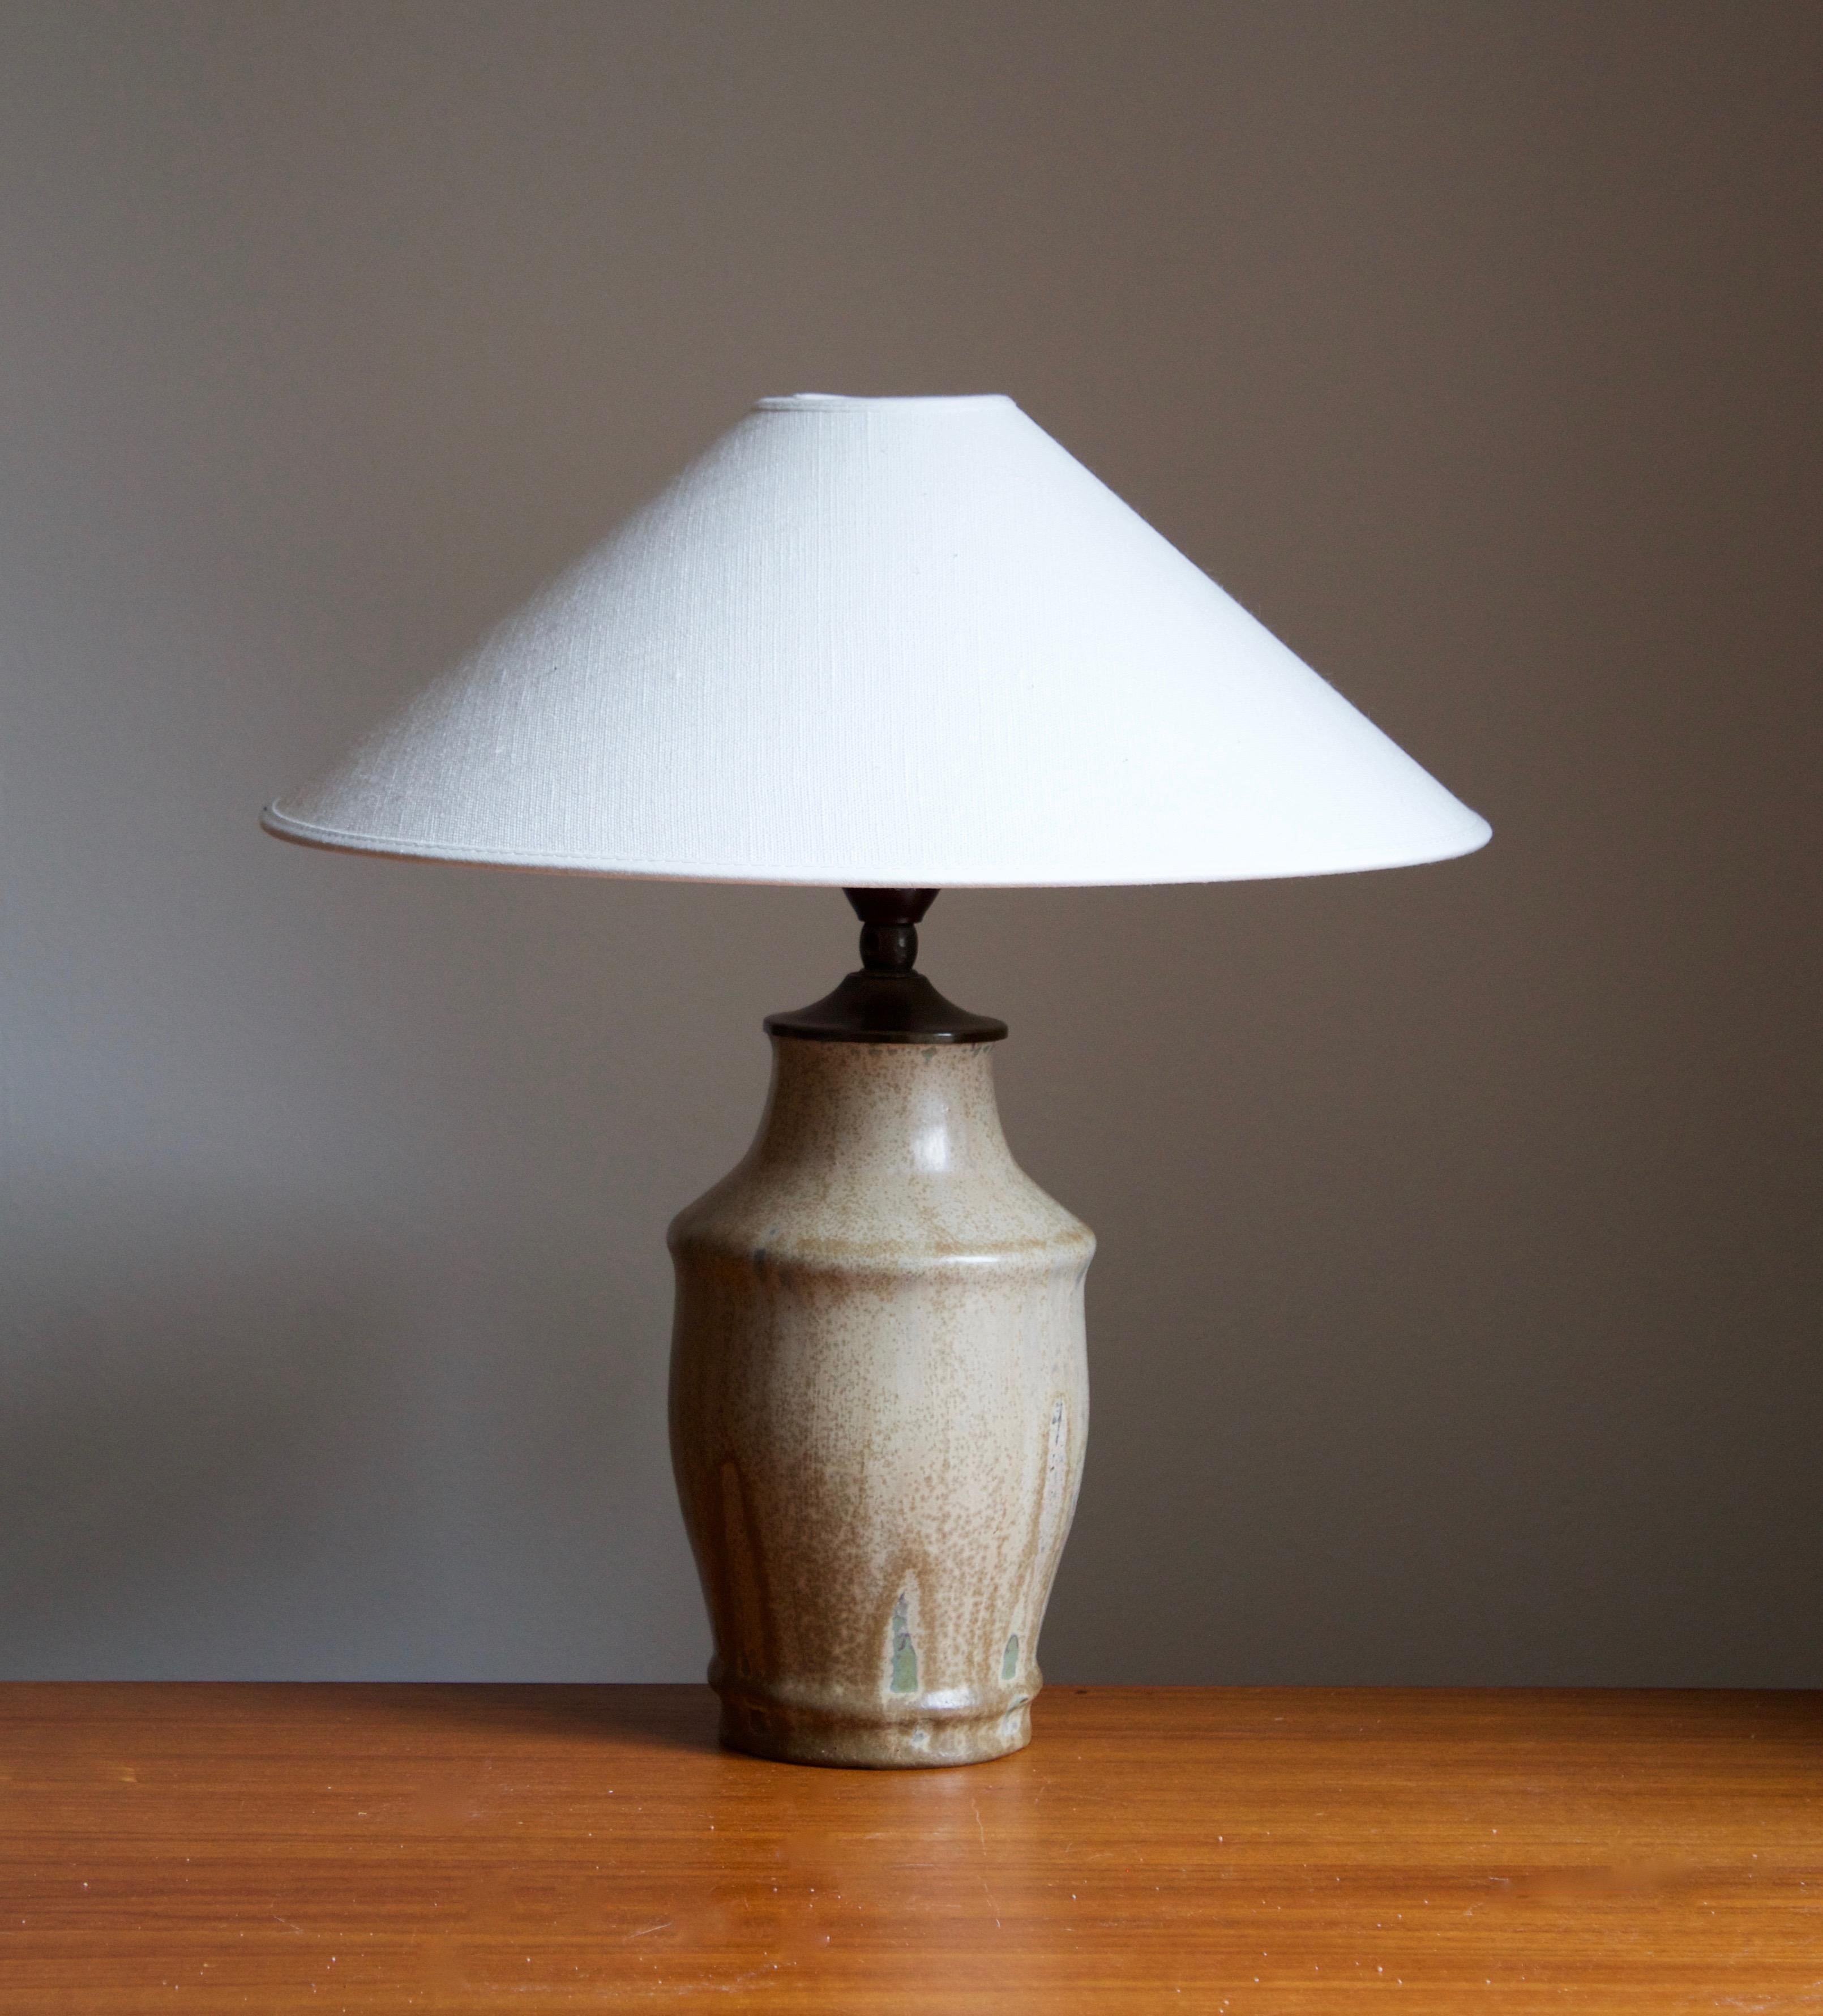 A table lamp designed and produced Royal Copenhagen, Denmark, 1940s. Marked. 

Sold without lampshade. Stated dimensions exclude lampshade, height includes socket.

Glaze features brown-beige colors.